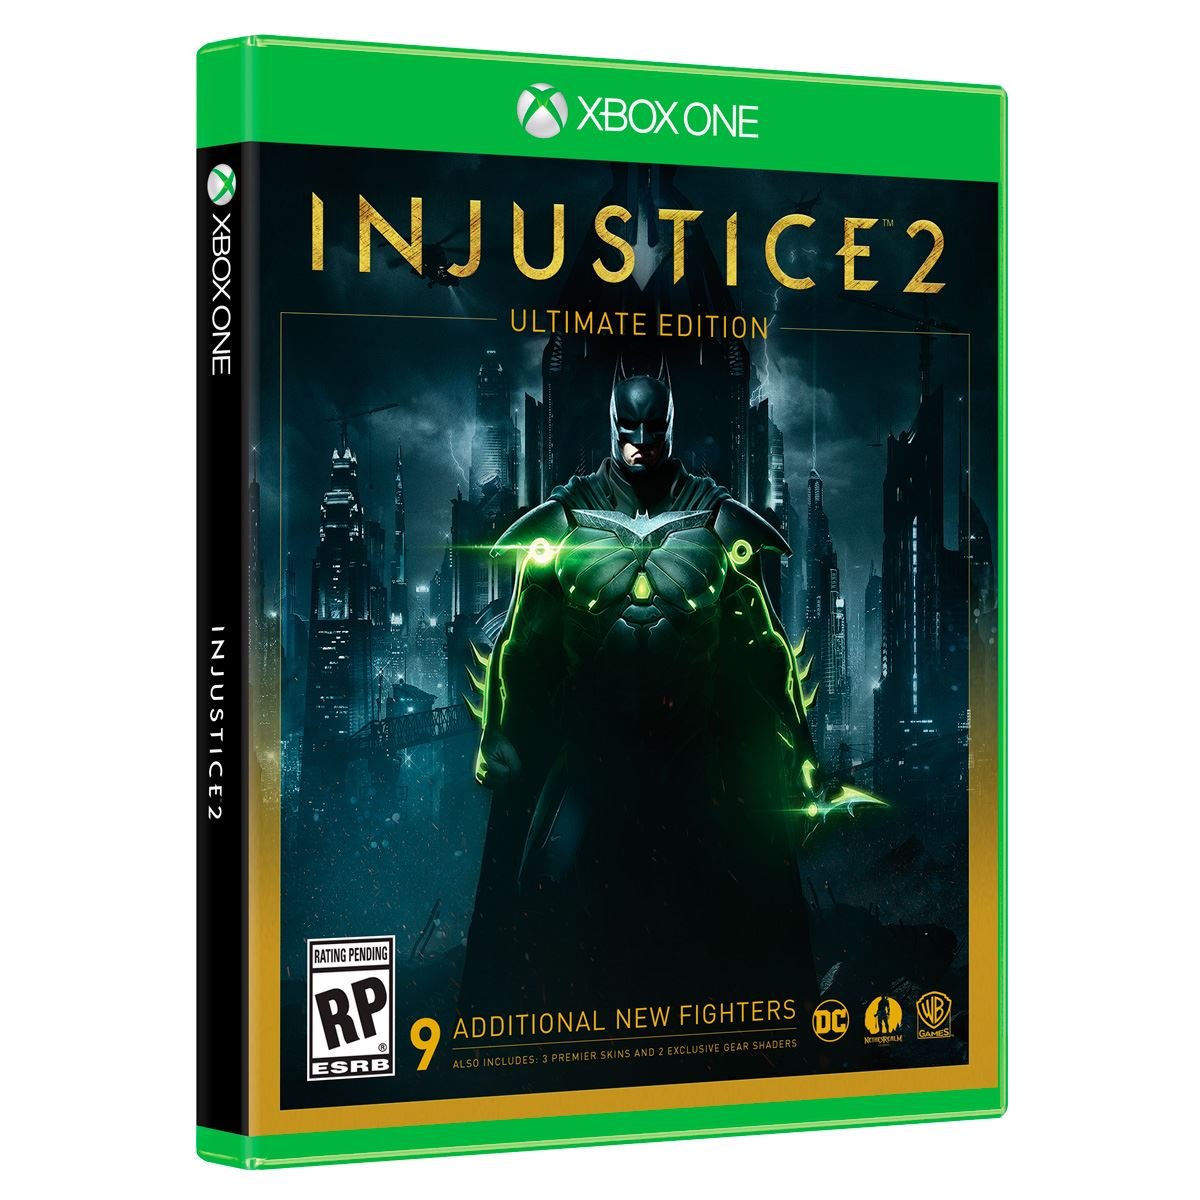 Xbox One Injustice 2 Ultimate Edition